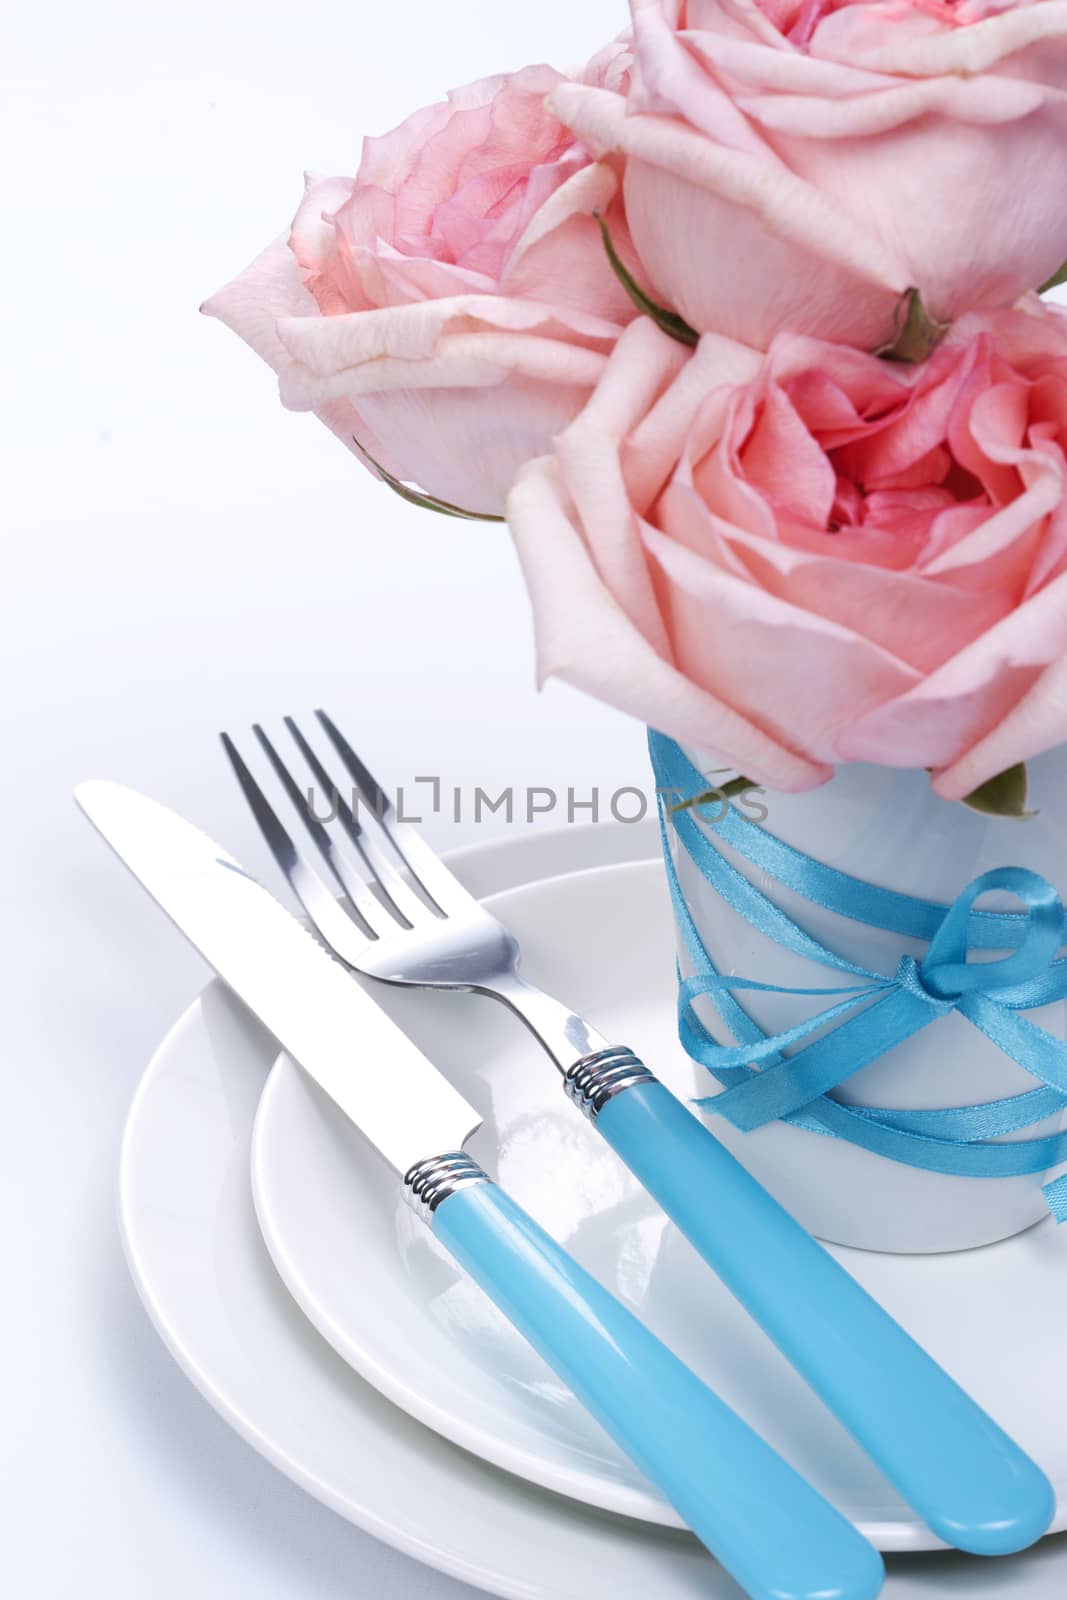 Romantic table setting with roses